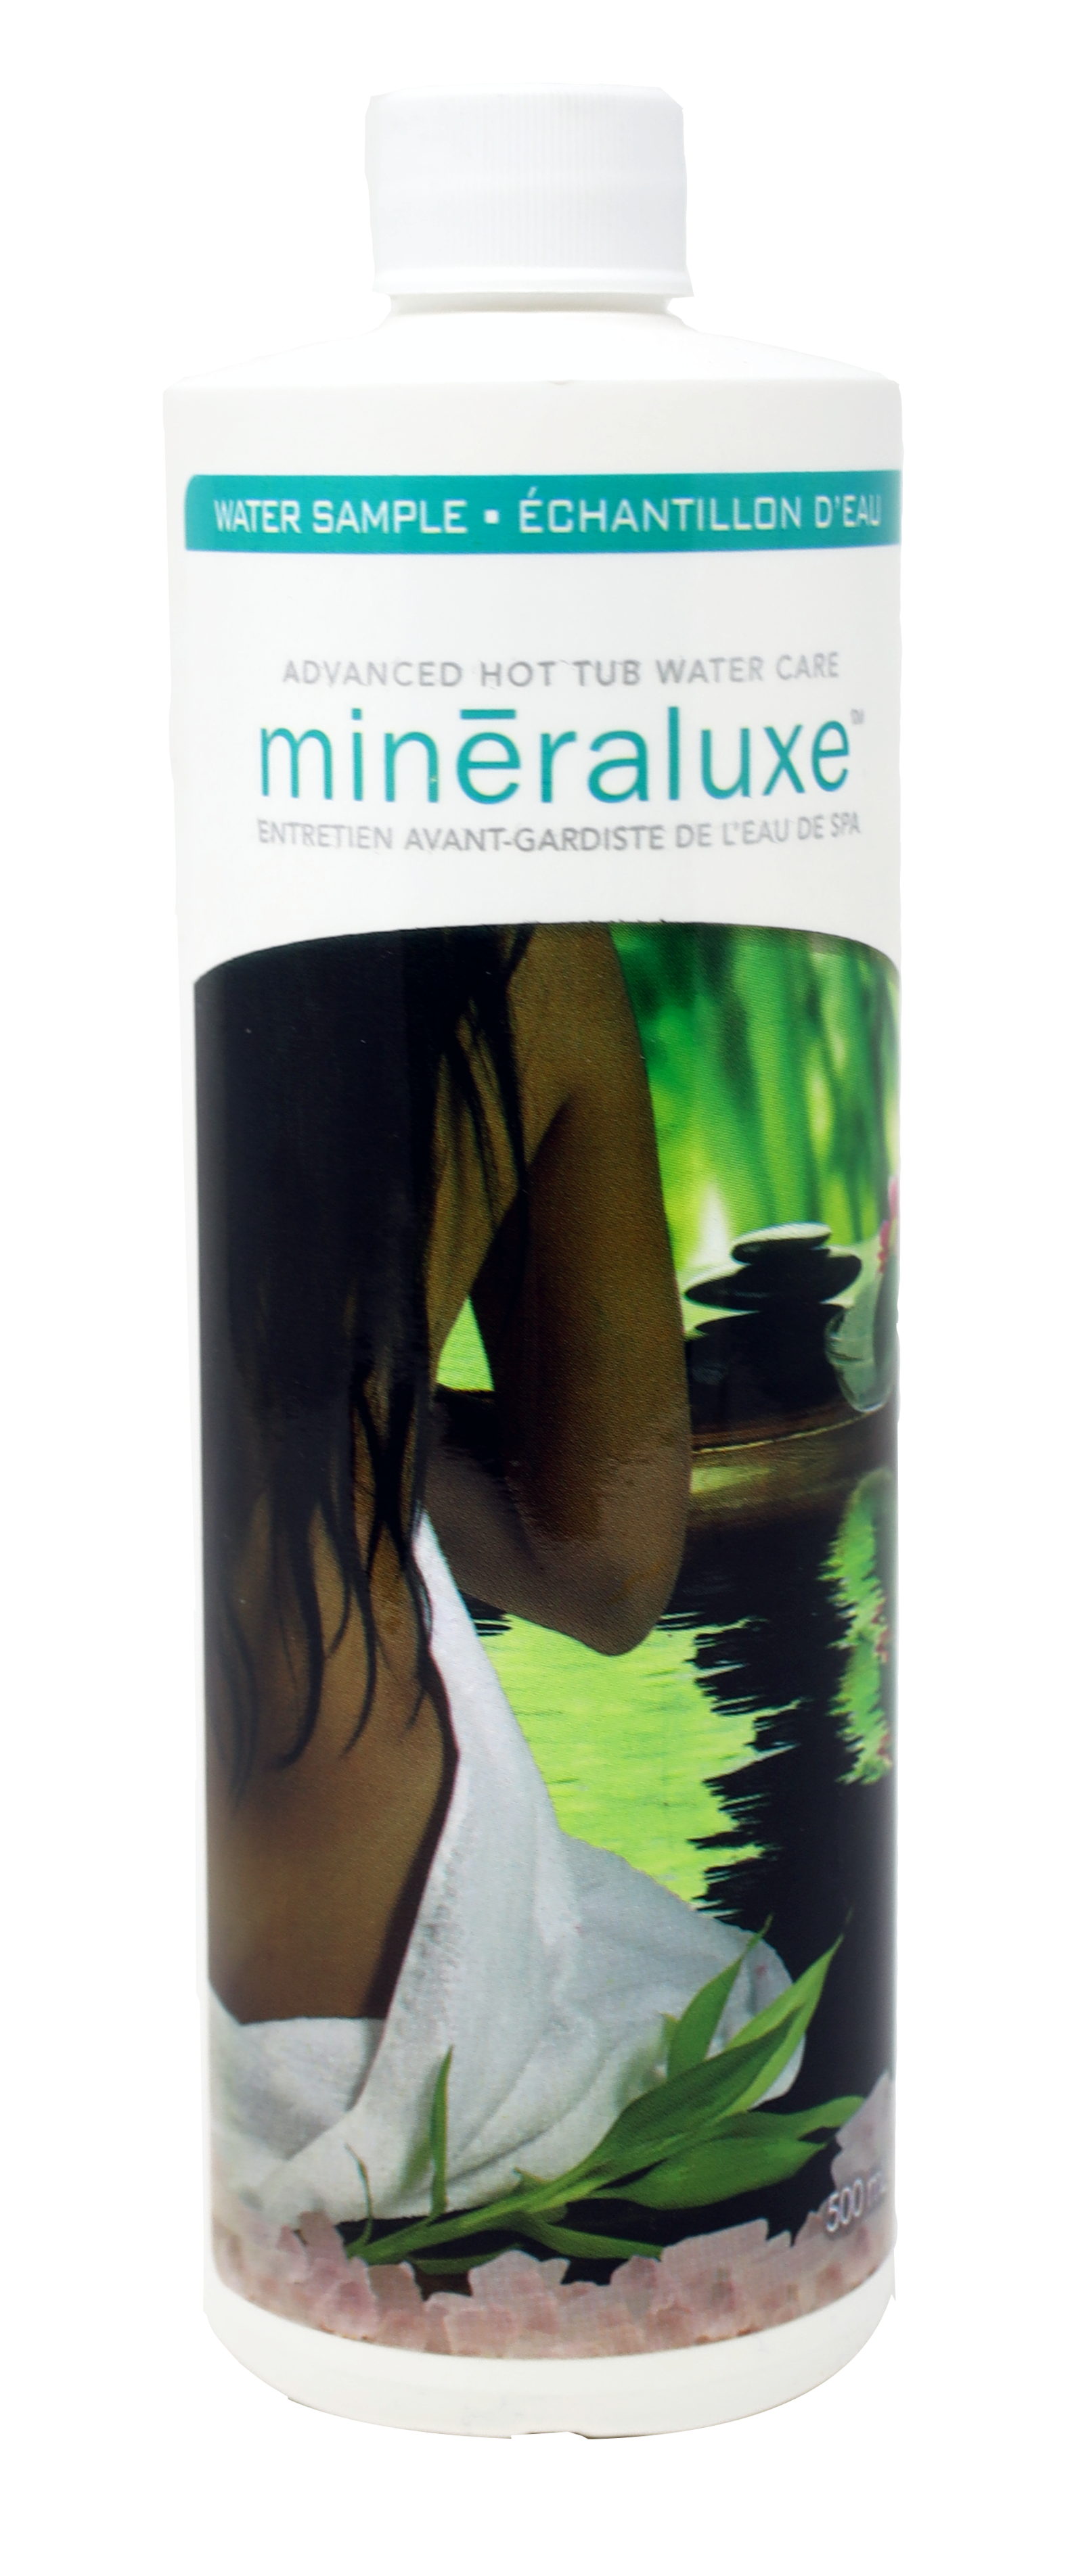 Mineraluxe Water Sample 1 X 1 Pint - LINERS